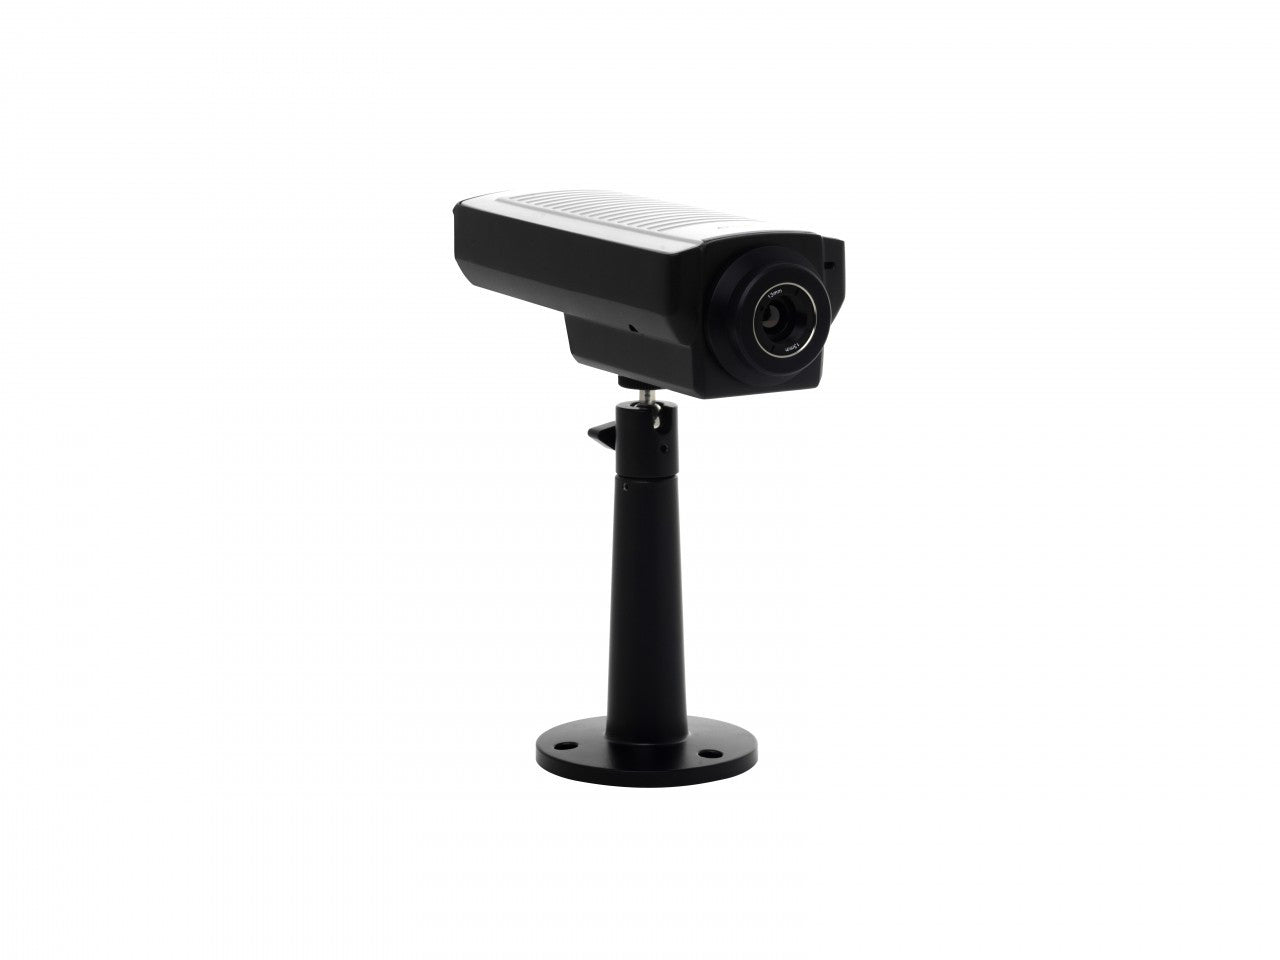 AXIS Q1910 (0334-001) Thermal Network Camera